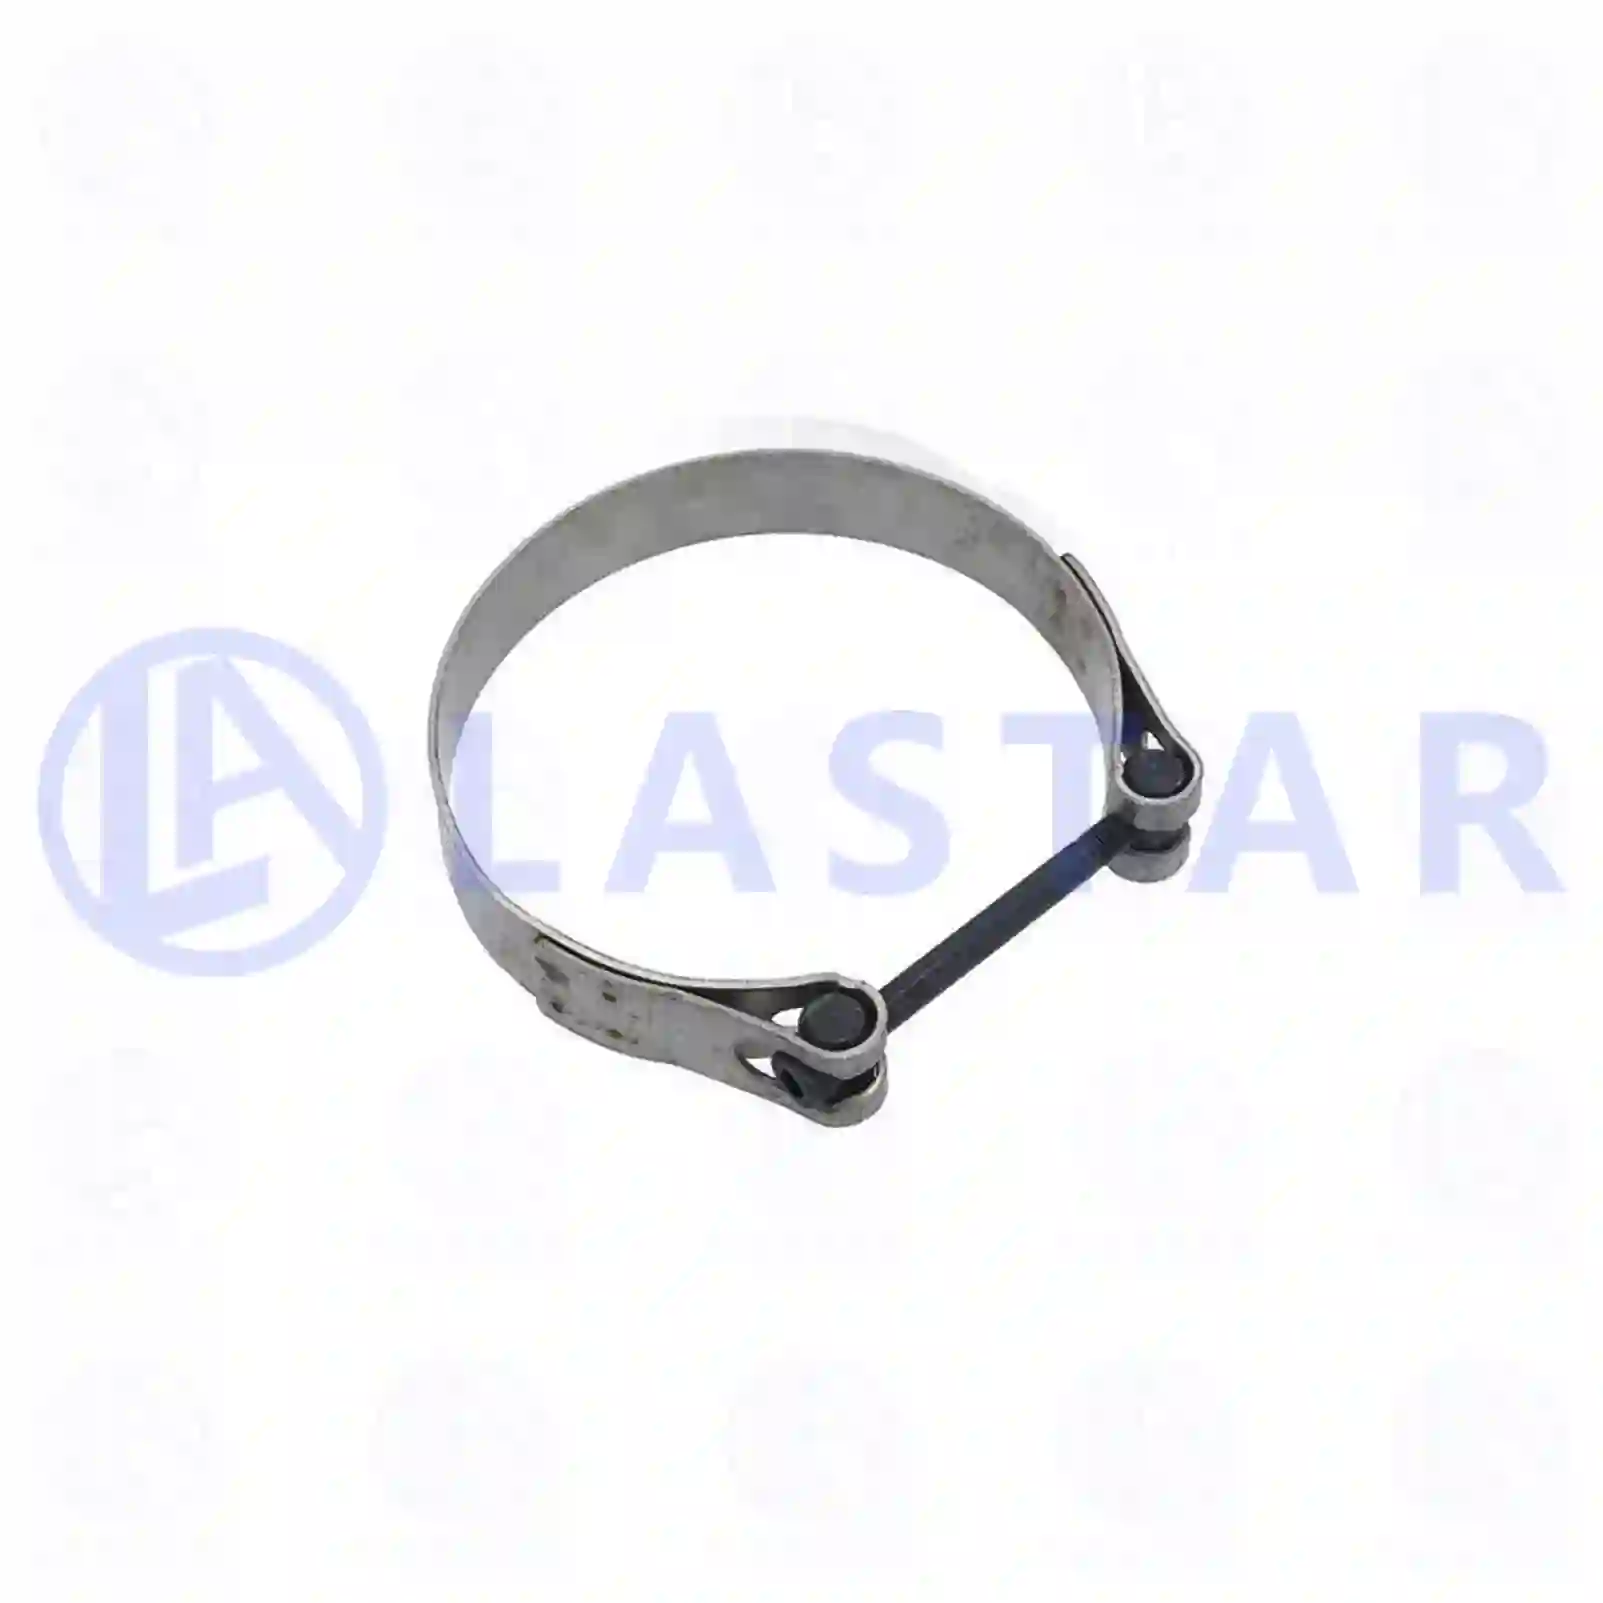 Clamp, 77706916, 1445015, 1779825 ||  77706916 Lastar Spare Part | Truck Spare Parts, Auotomotive Spare Parts Clamp, 77706916, 1445015, 1779825 ||  77706916 Lastar Spare Part | Truck Spare Parts, Auotomotive Spare Parts